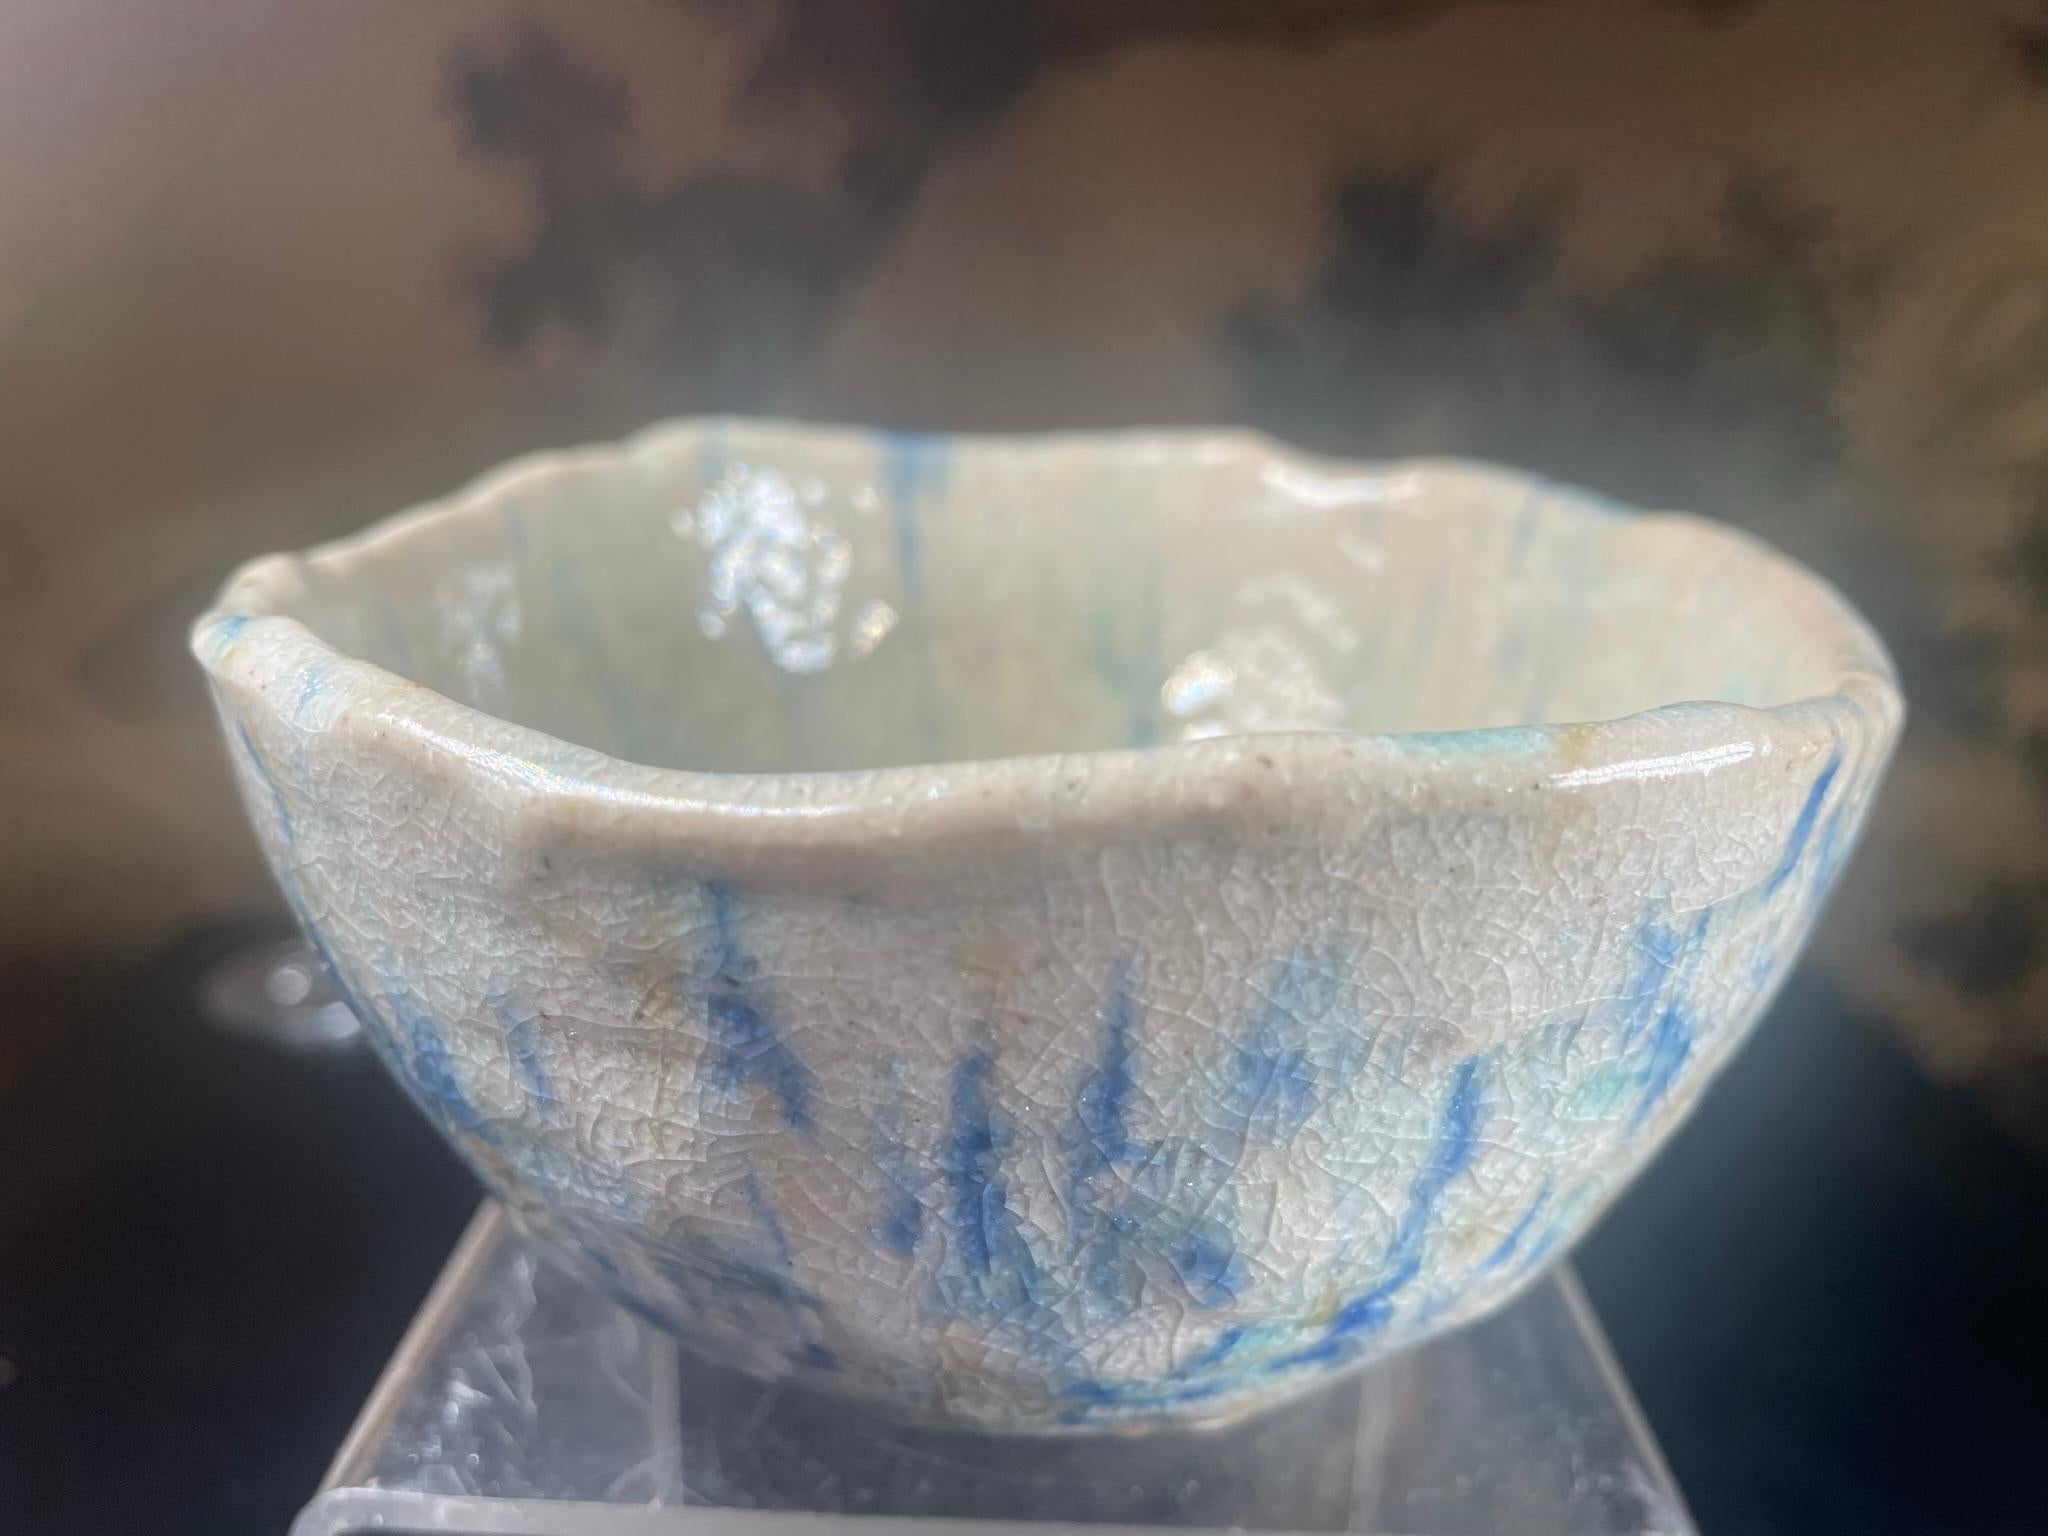 Mint Shozan tea bowl, Akatsu ware,

Blue Impressions. 

From Japan, a beautiful hand-built, painted and glazed, Akatsu ware tea bowl in an impressive Picasso like impressionistic motif created in the 1930's.- over fifty years ago.

A stunning medium